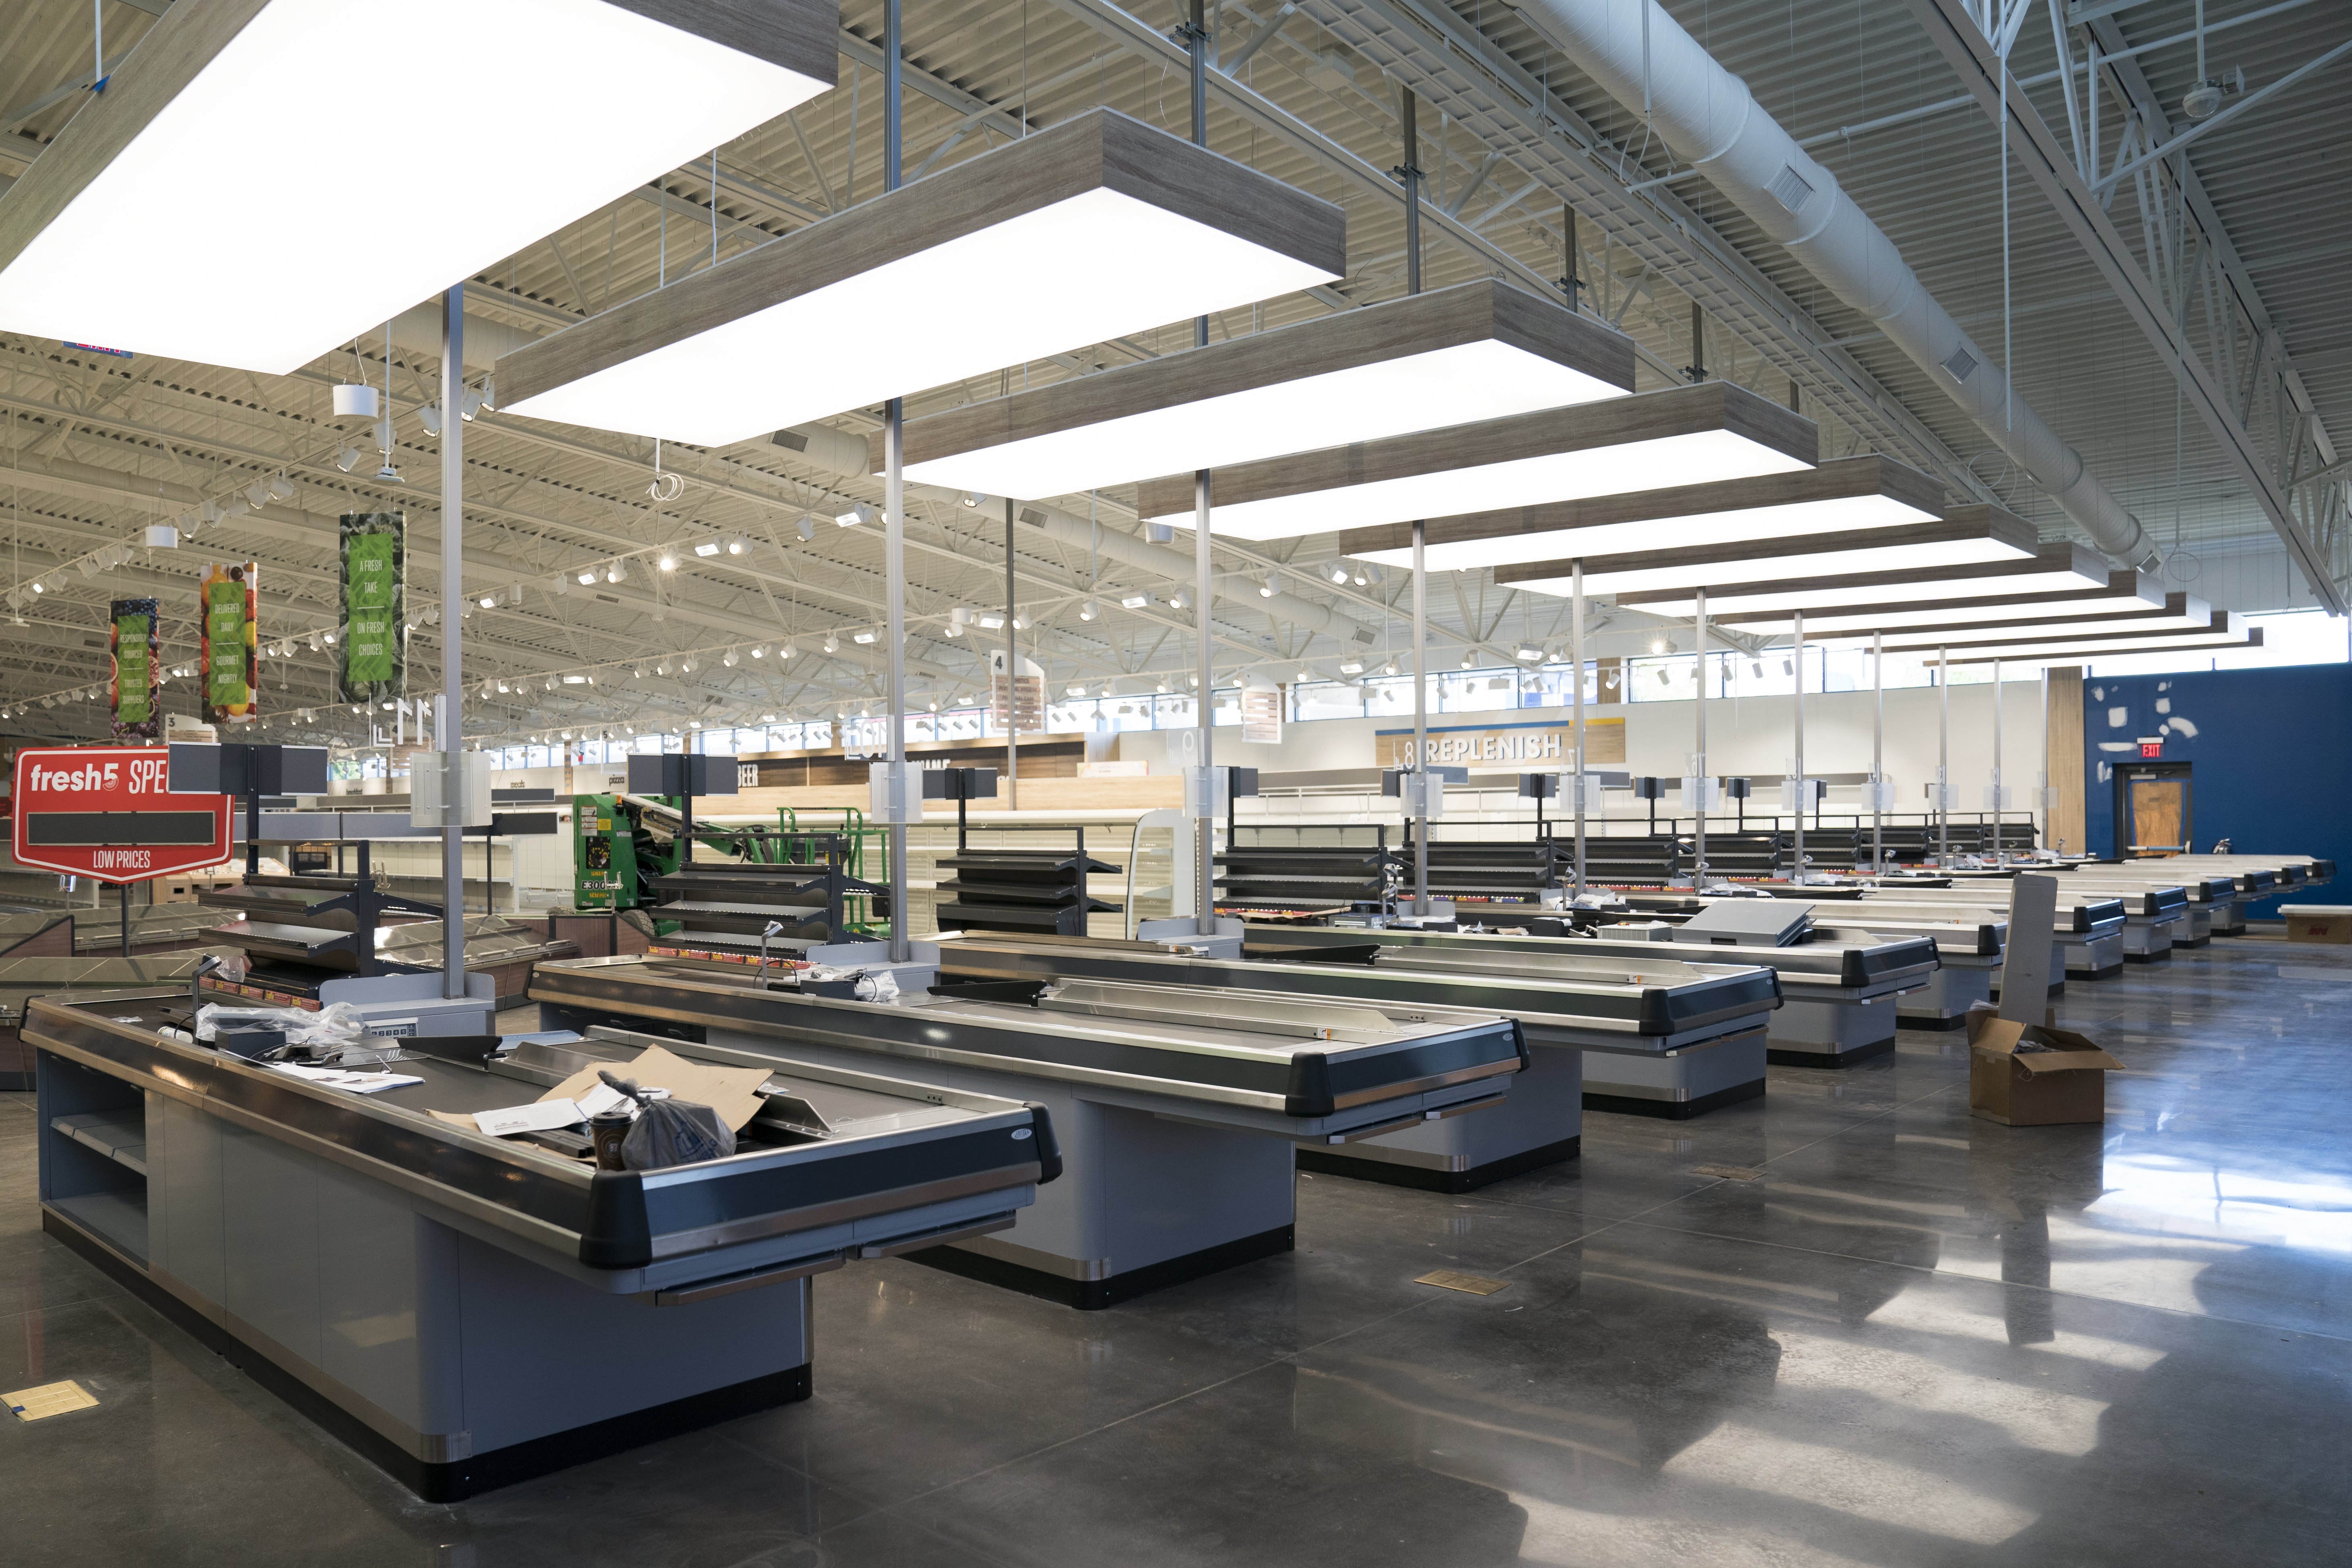 2017-06-06 09:37:34 epa06013727 The checkout area of a Lidl supermarket near completion and set to open in Culpeper, Virginia, USA, 06 June 2017. The German supermarket chain plans on opening its first 9 stores in the US on 15 June and will open up to 100 by the end of summer. EPA/SHAWN THEW